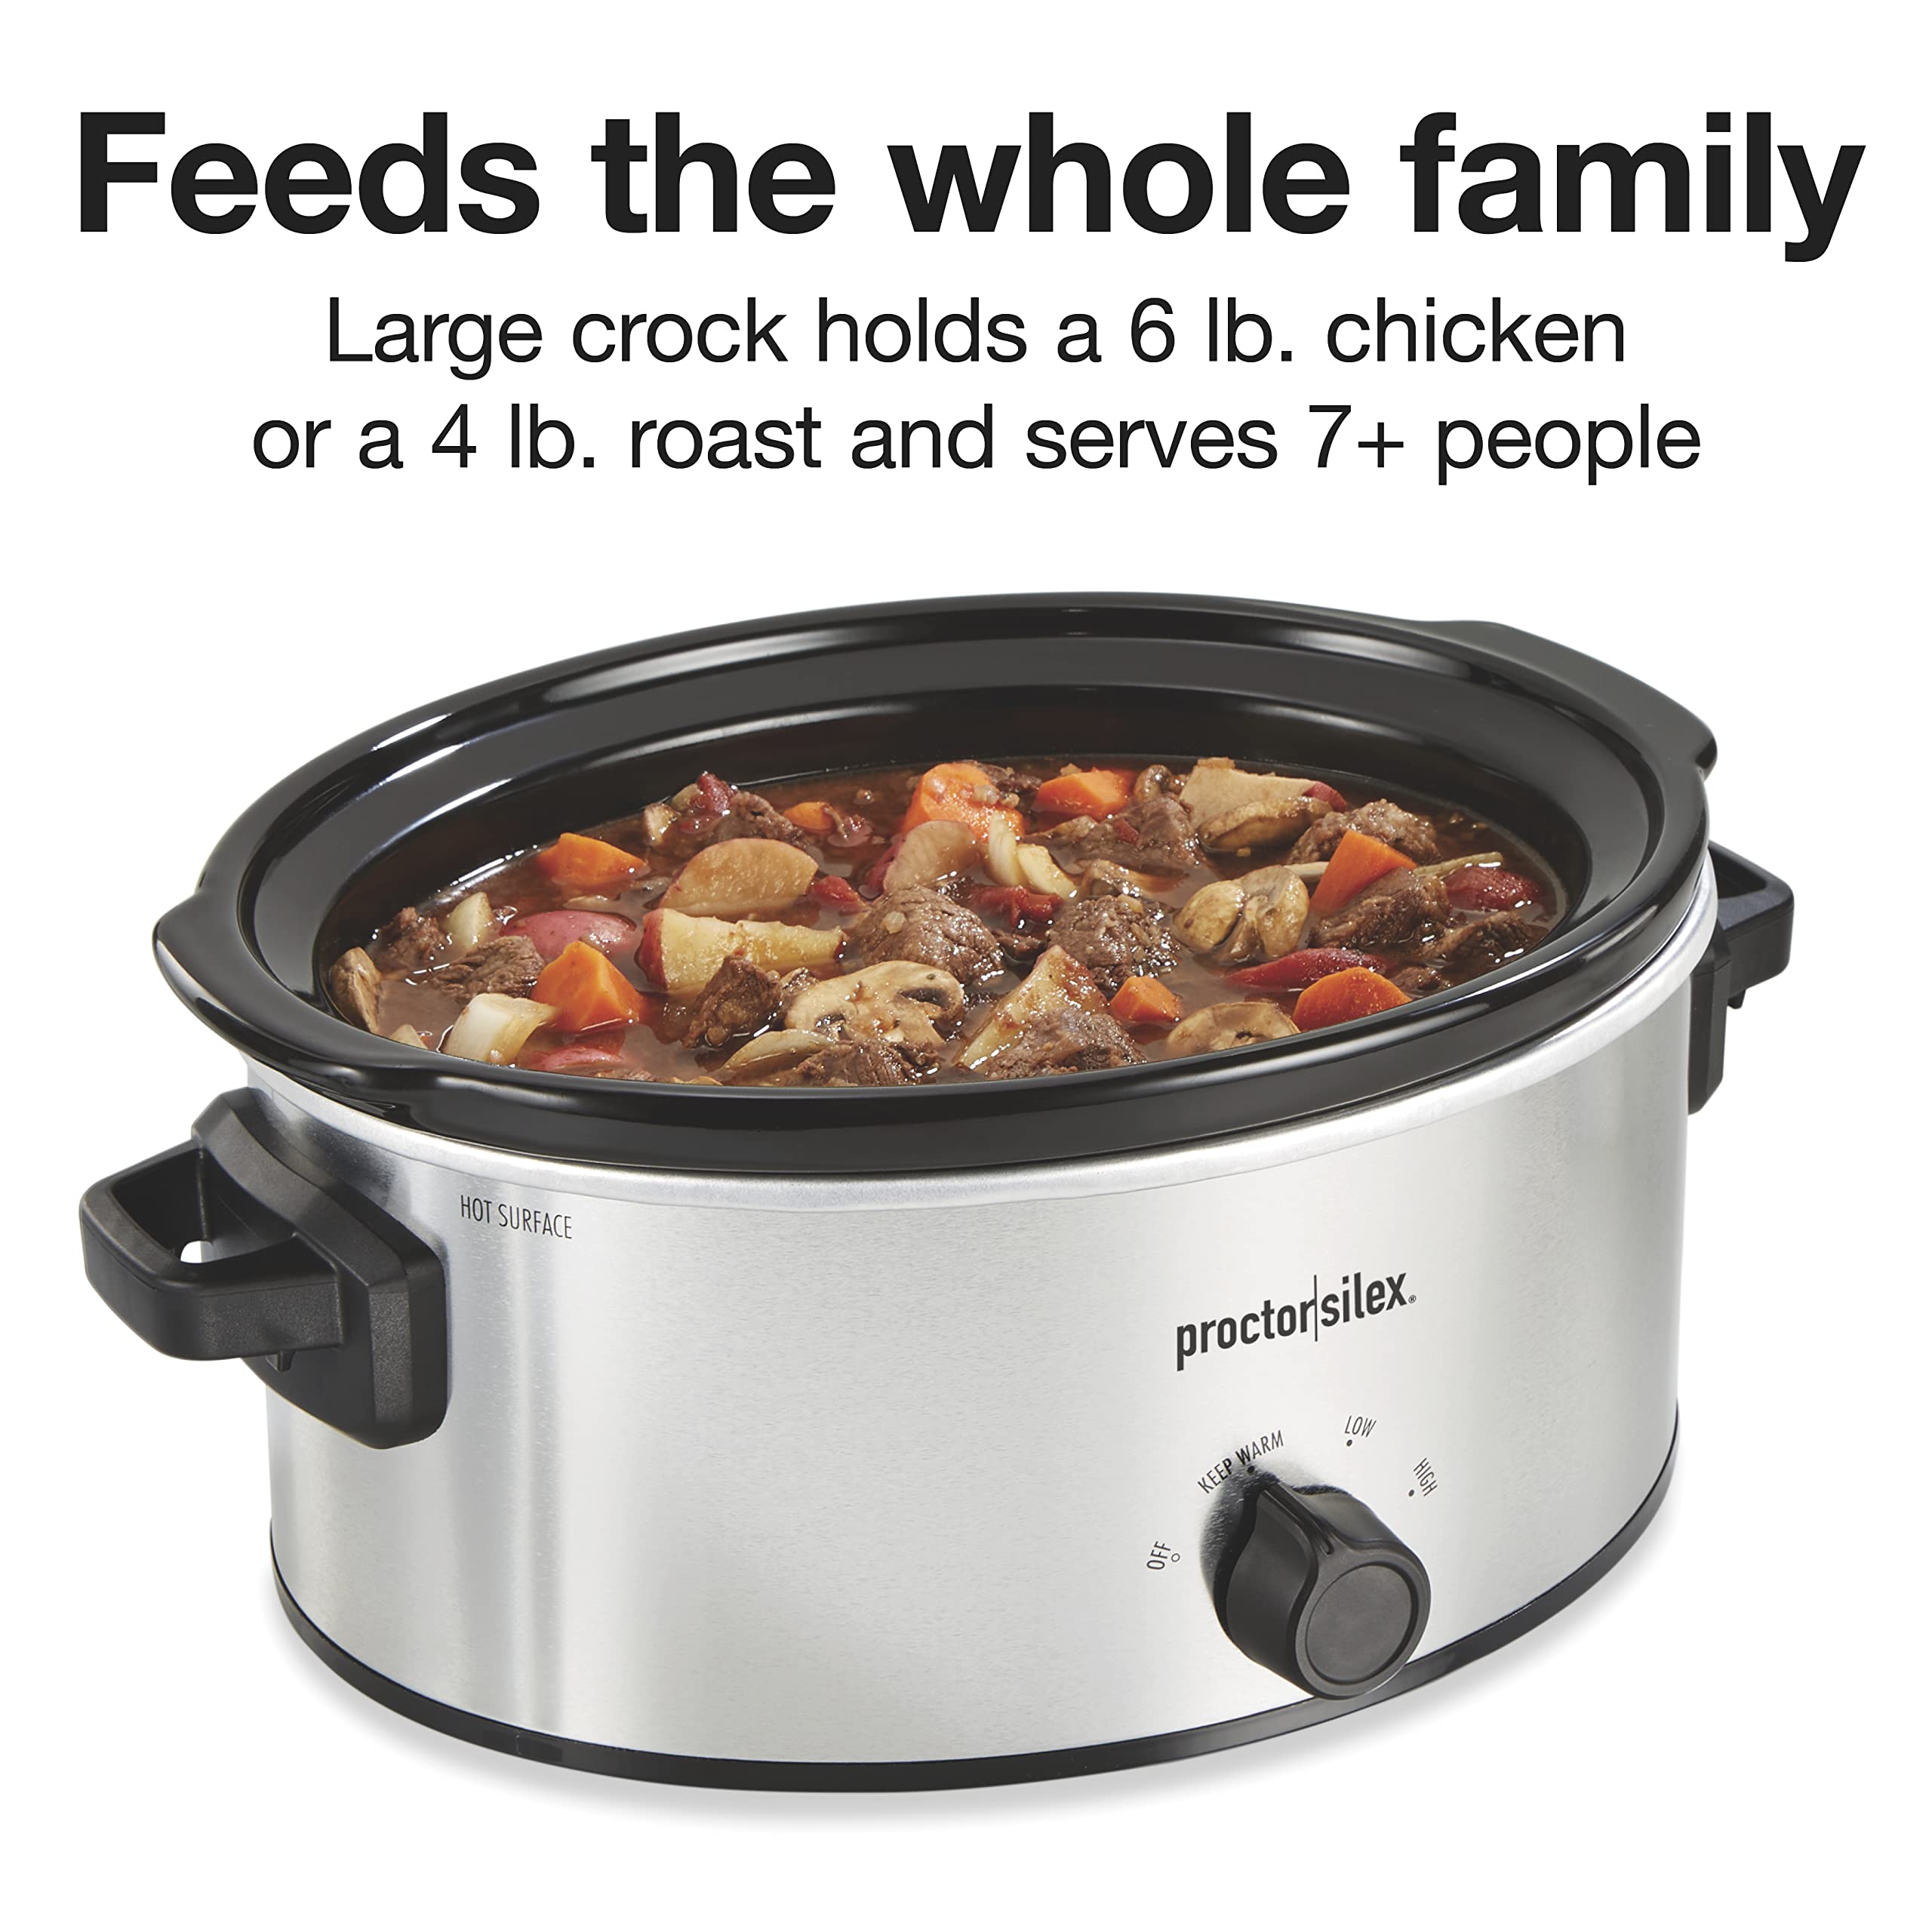 Proctor Silex Double Dish Slow Cooker with 6qt Crock and Dual 2.5qt Nonstick Insert to Cook Two Meals at Once, Dishwasher Safe Pot & Lid, Silver (33563)